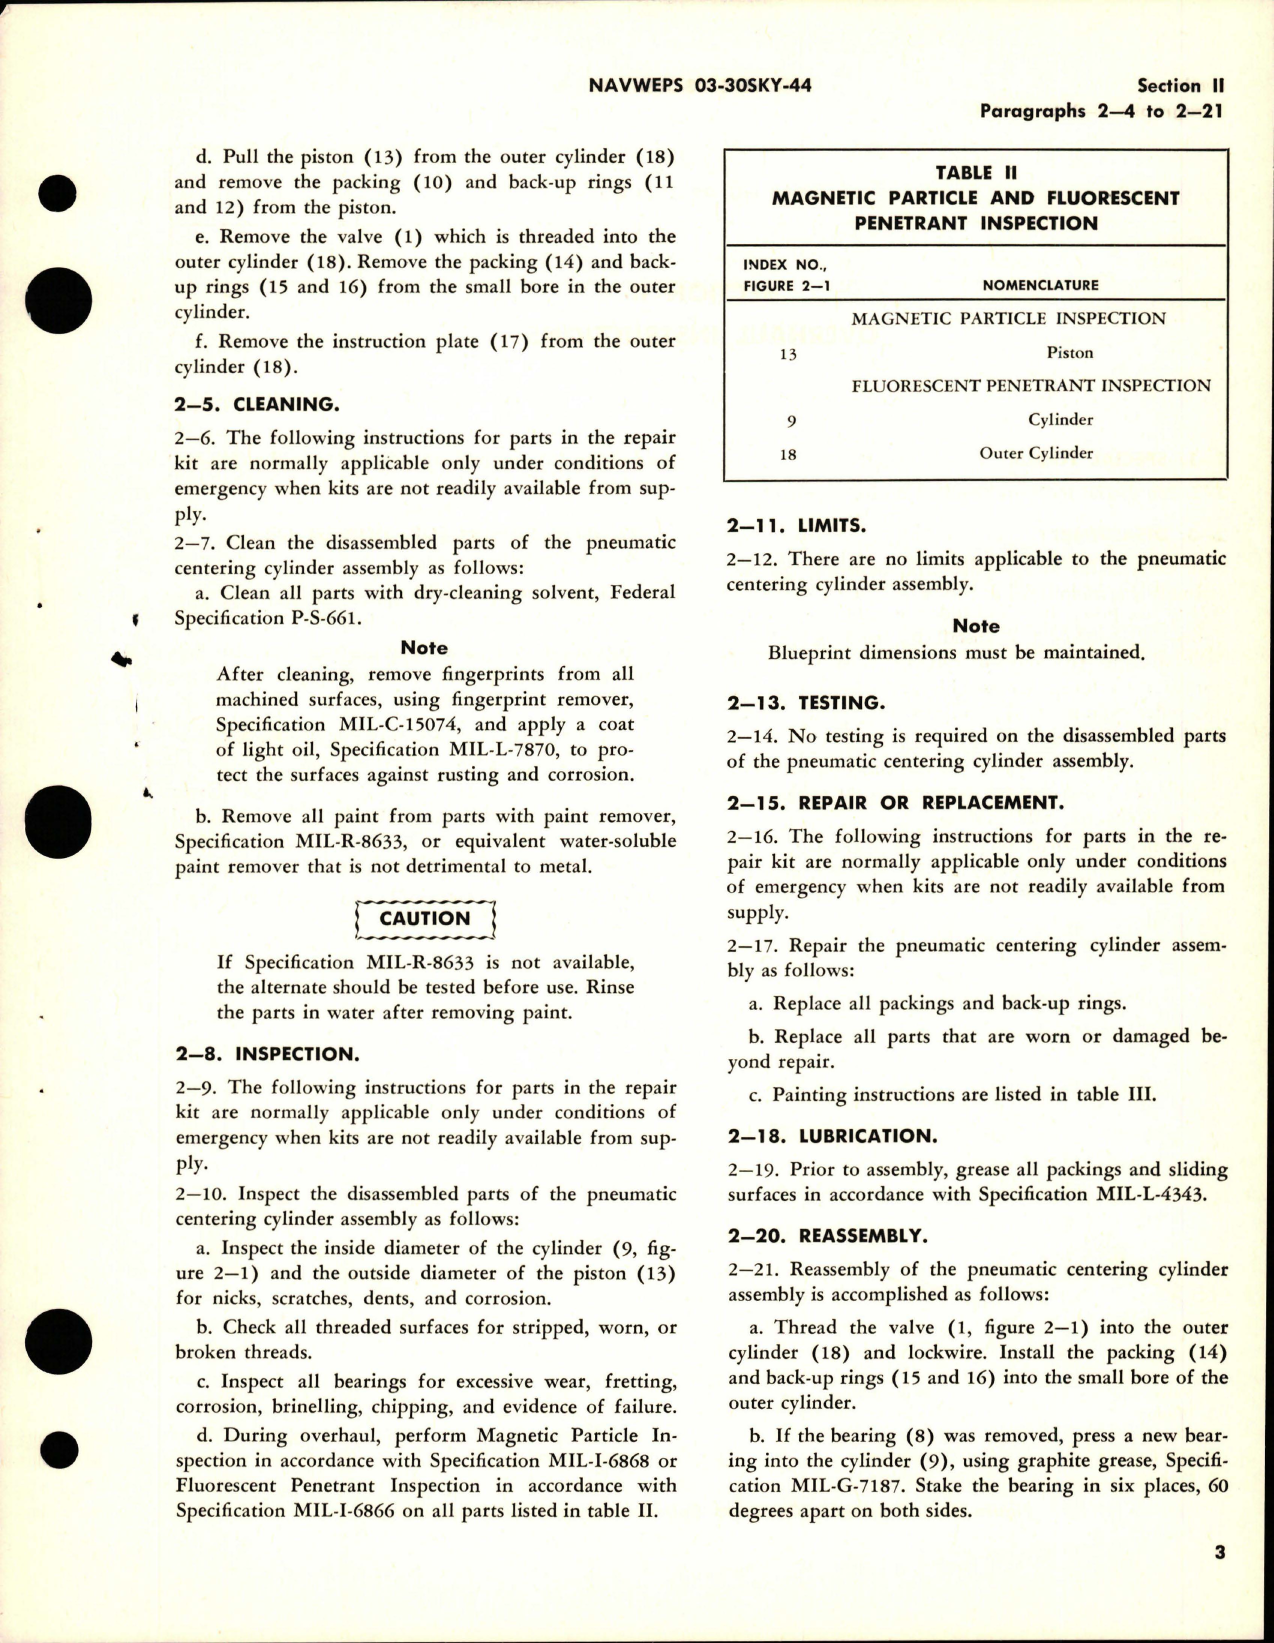 Sample page 7 from AirCorps Library document: Overhaul Instructions for Pneumatic Centering Cylinder Assembly - Part S6125-50530